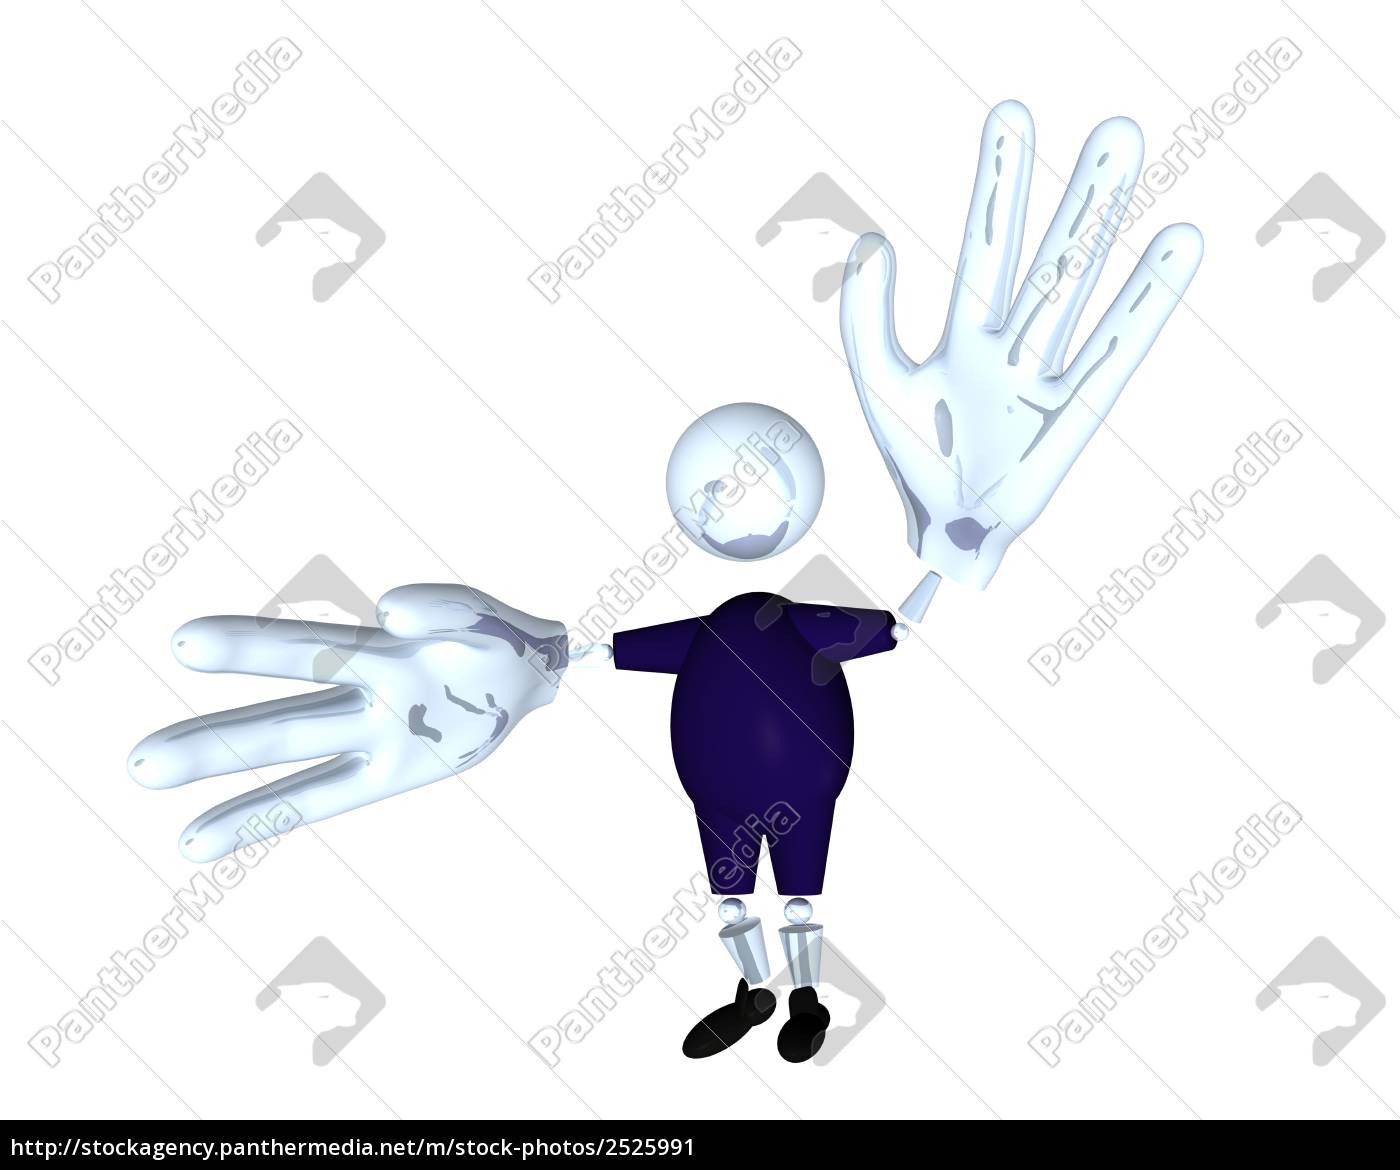 Helping Hands Royalty Free Image 2525991 Panthermedia Stock Agency